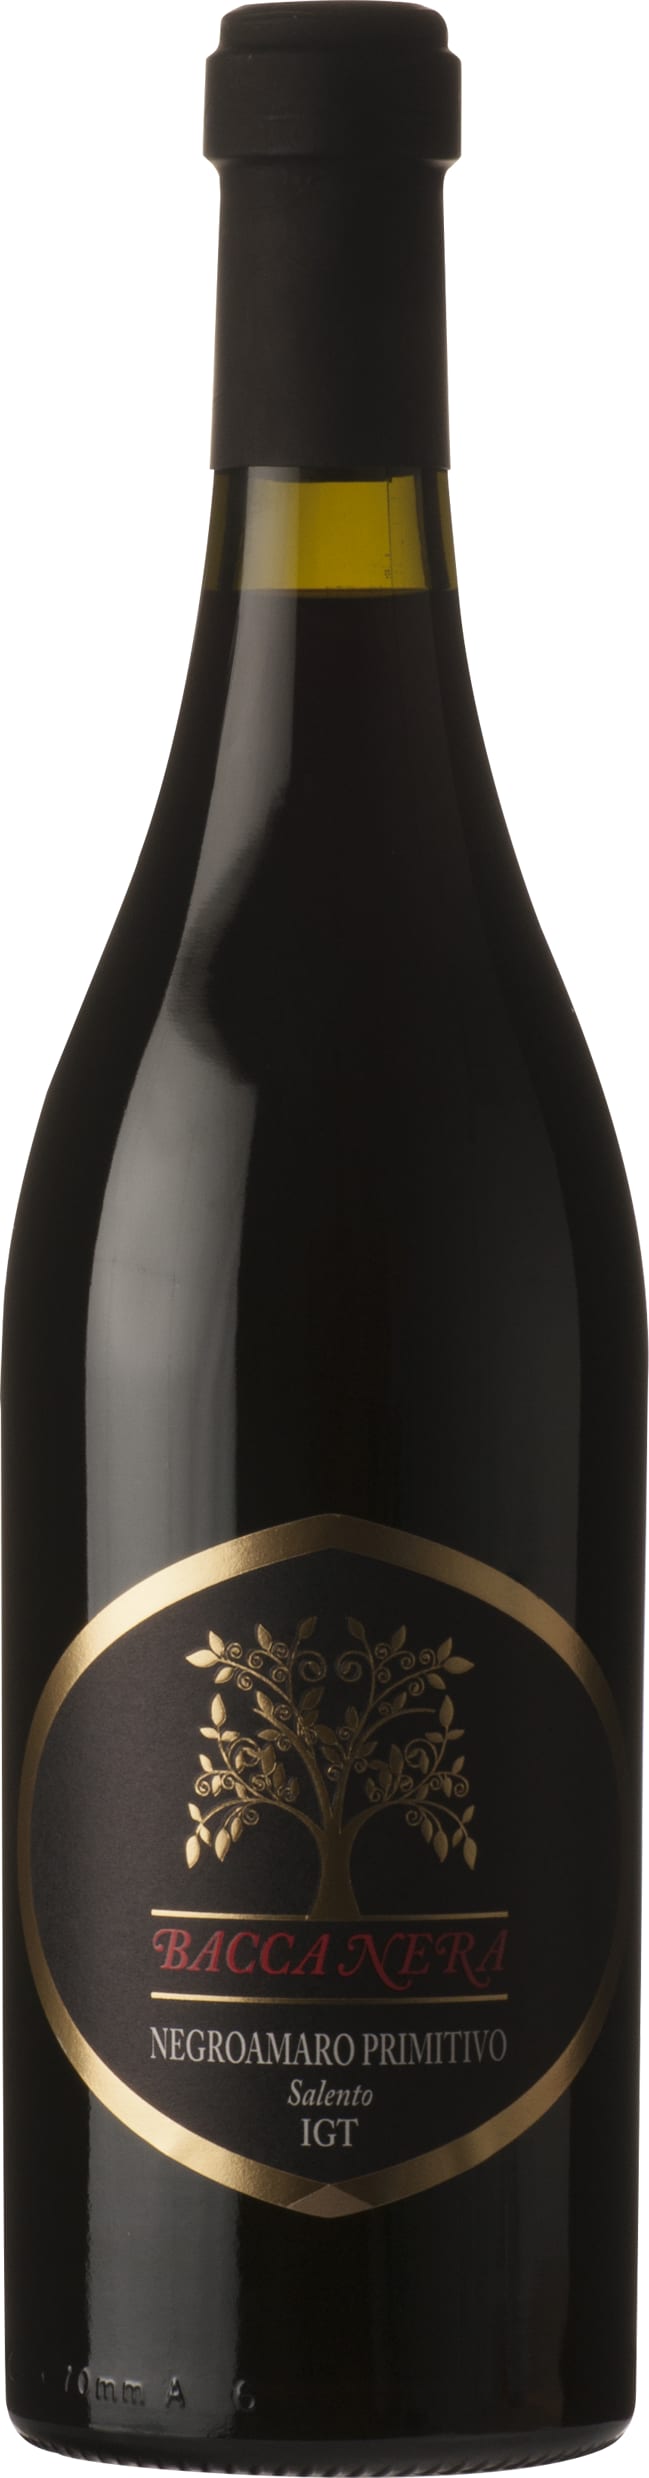 Bacca Nera Negroamaro Primitivo IGT Salento 2023 75cl - Buy Bacca Nera Wines from GREAT WINES DIRECT wine shop